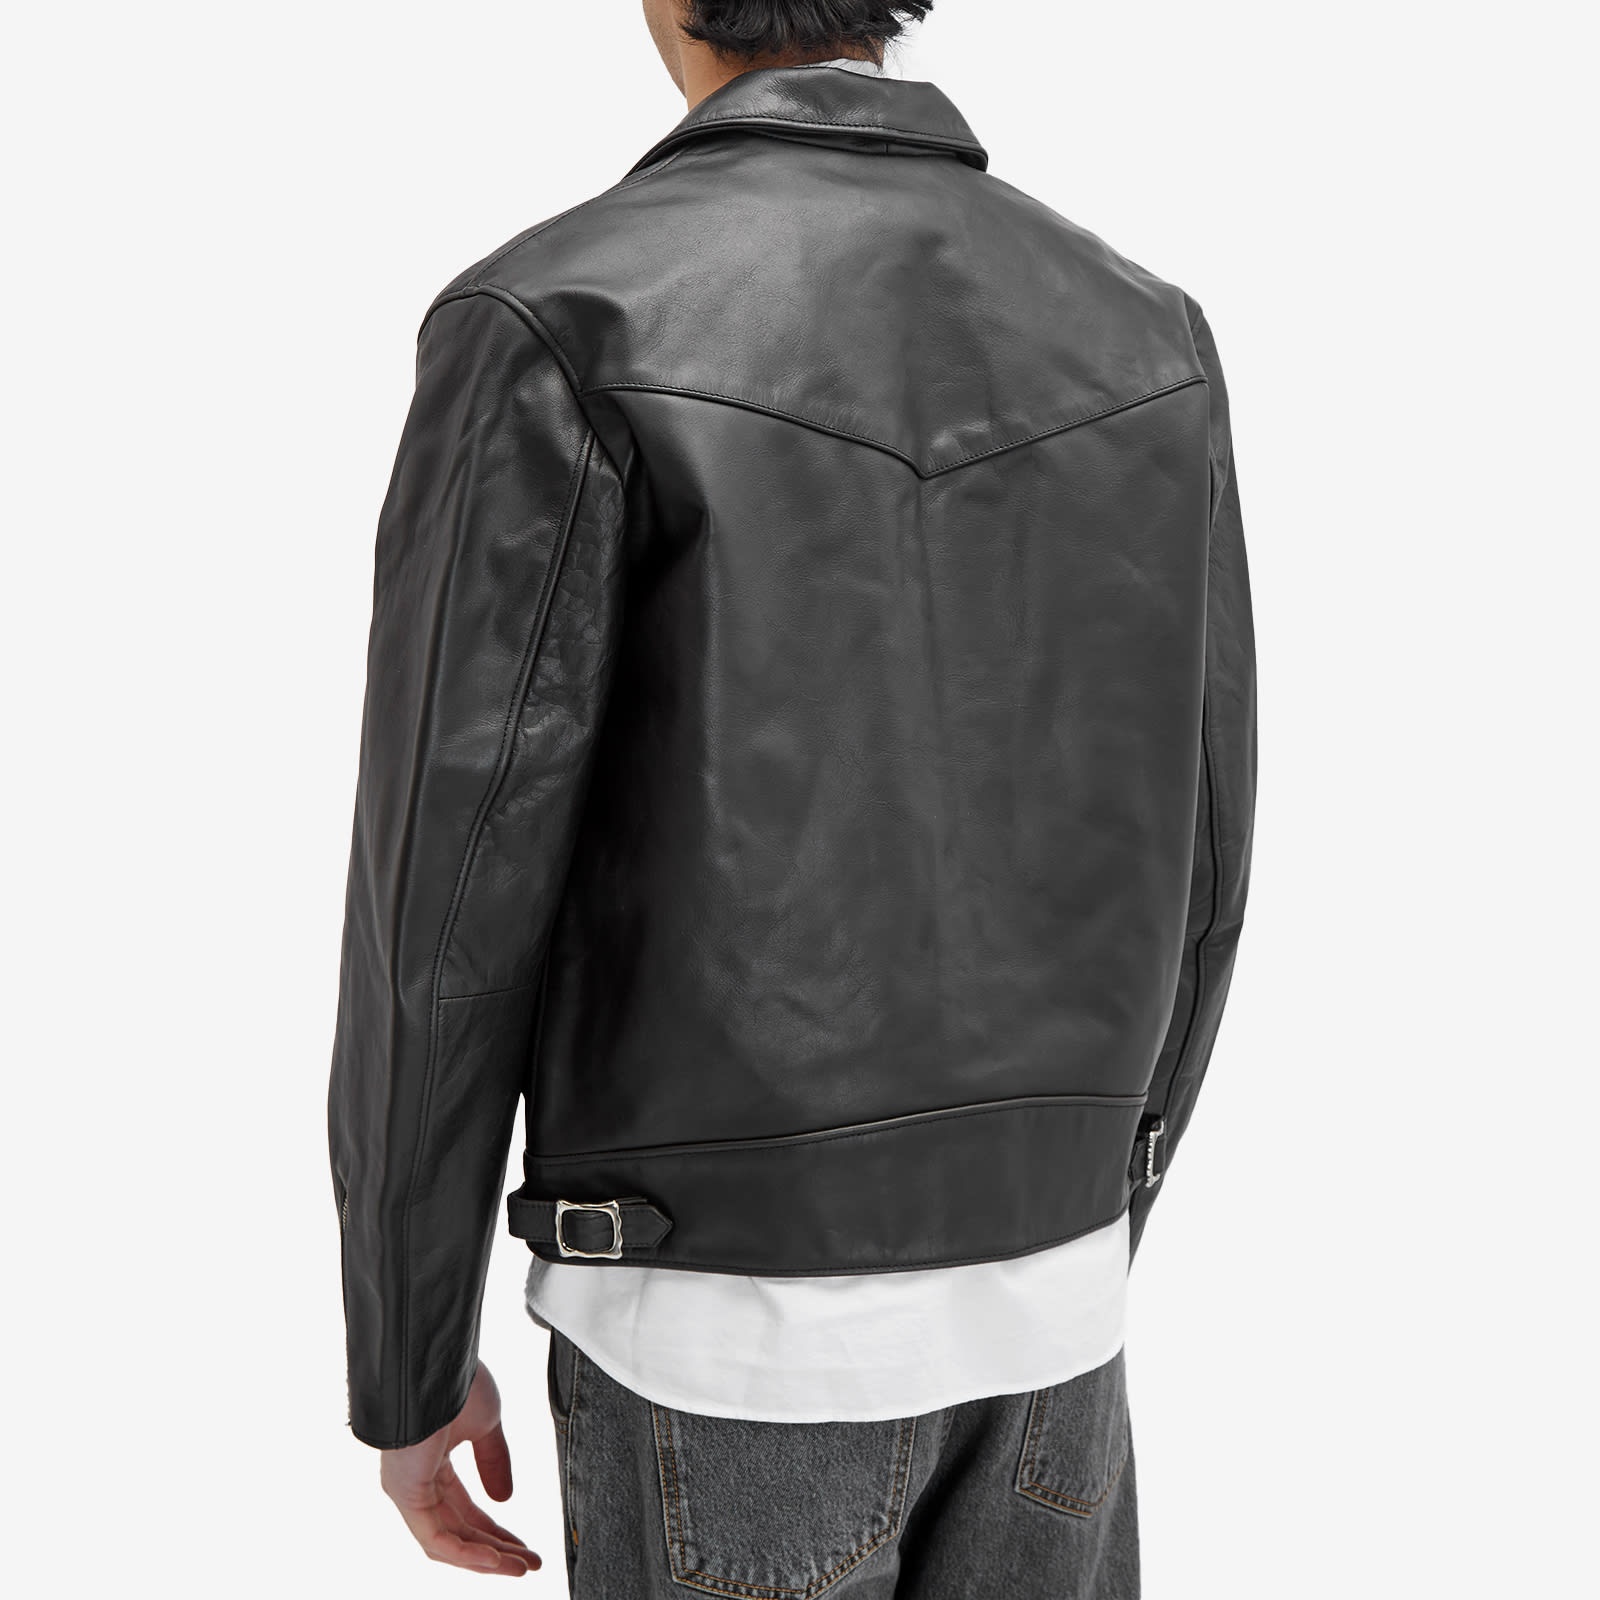 Nudie Jeans Co Eddy Rider Leather Jacket - 3